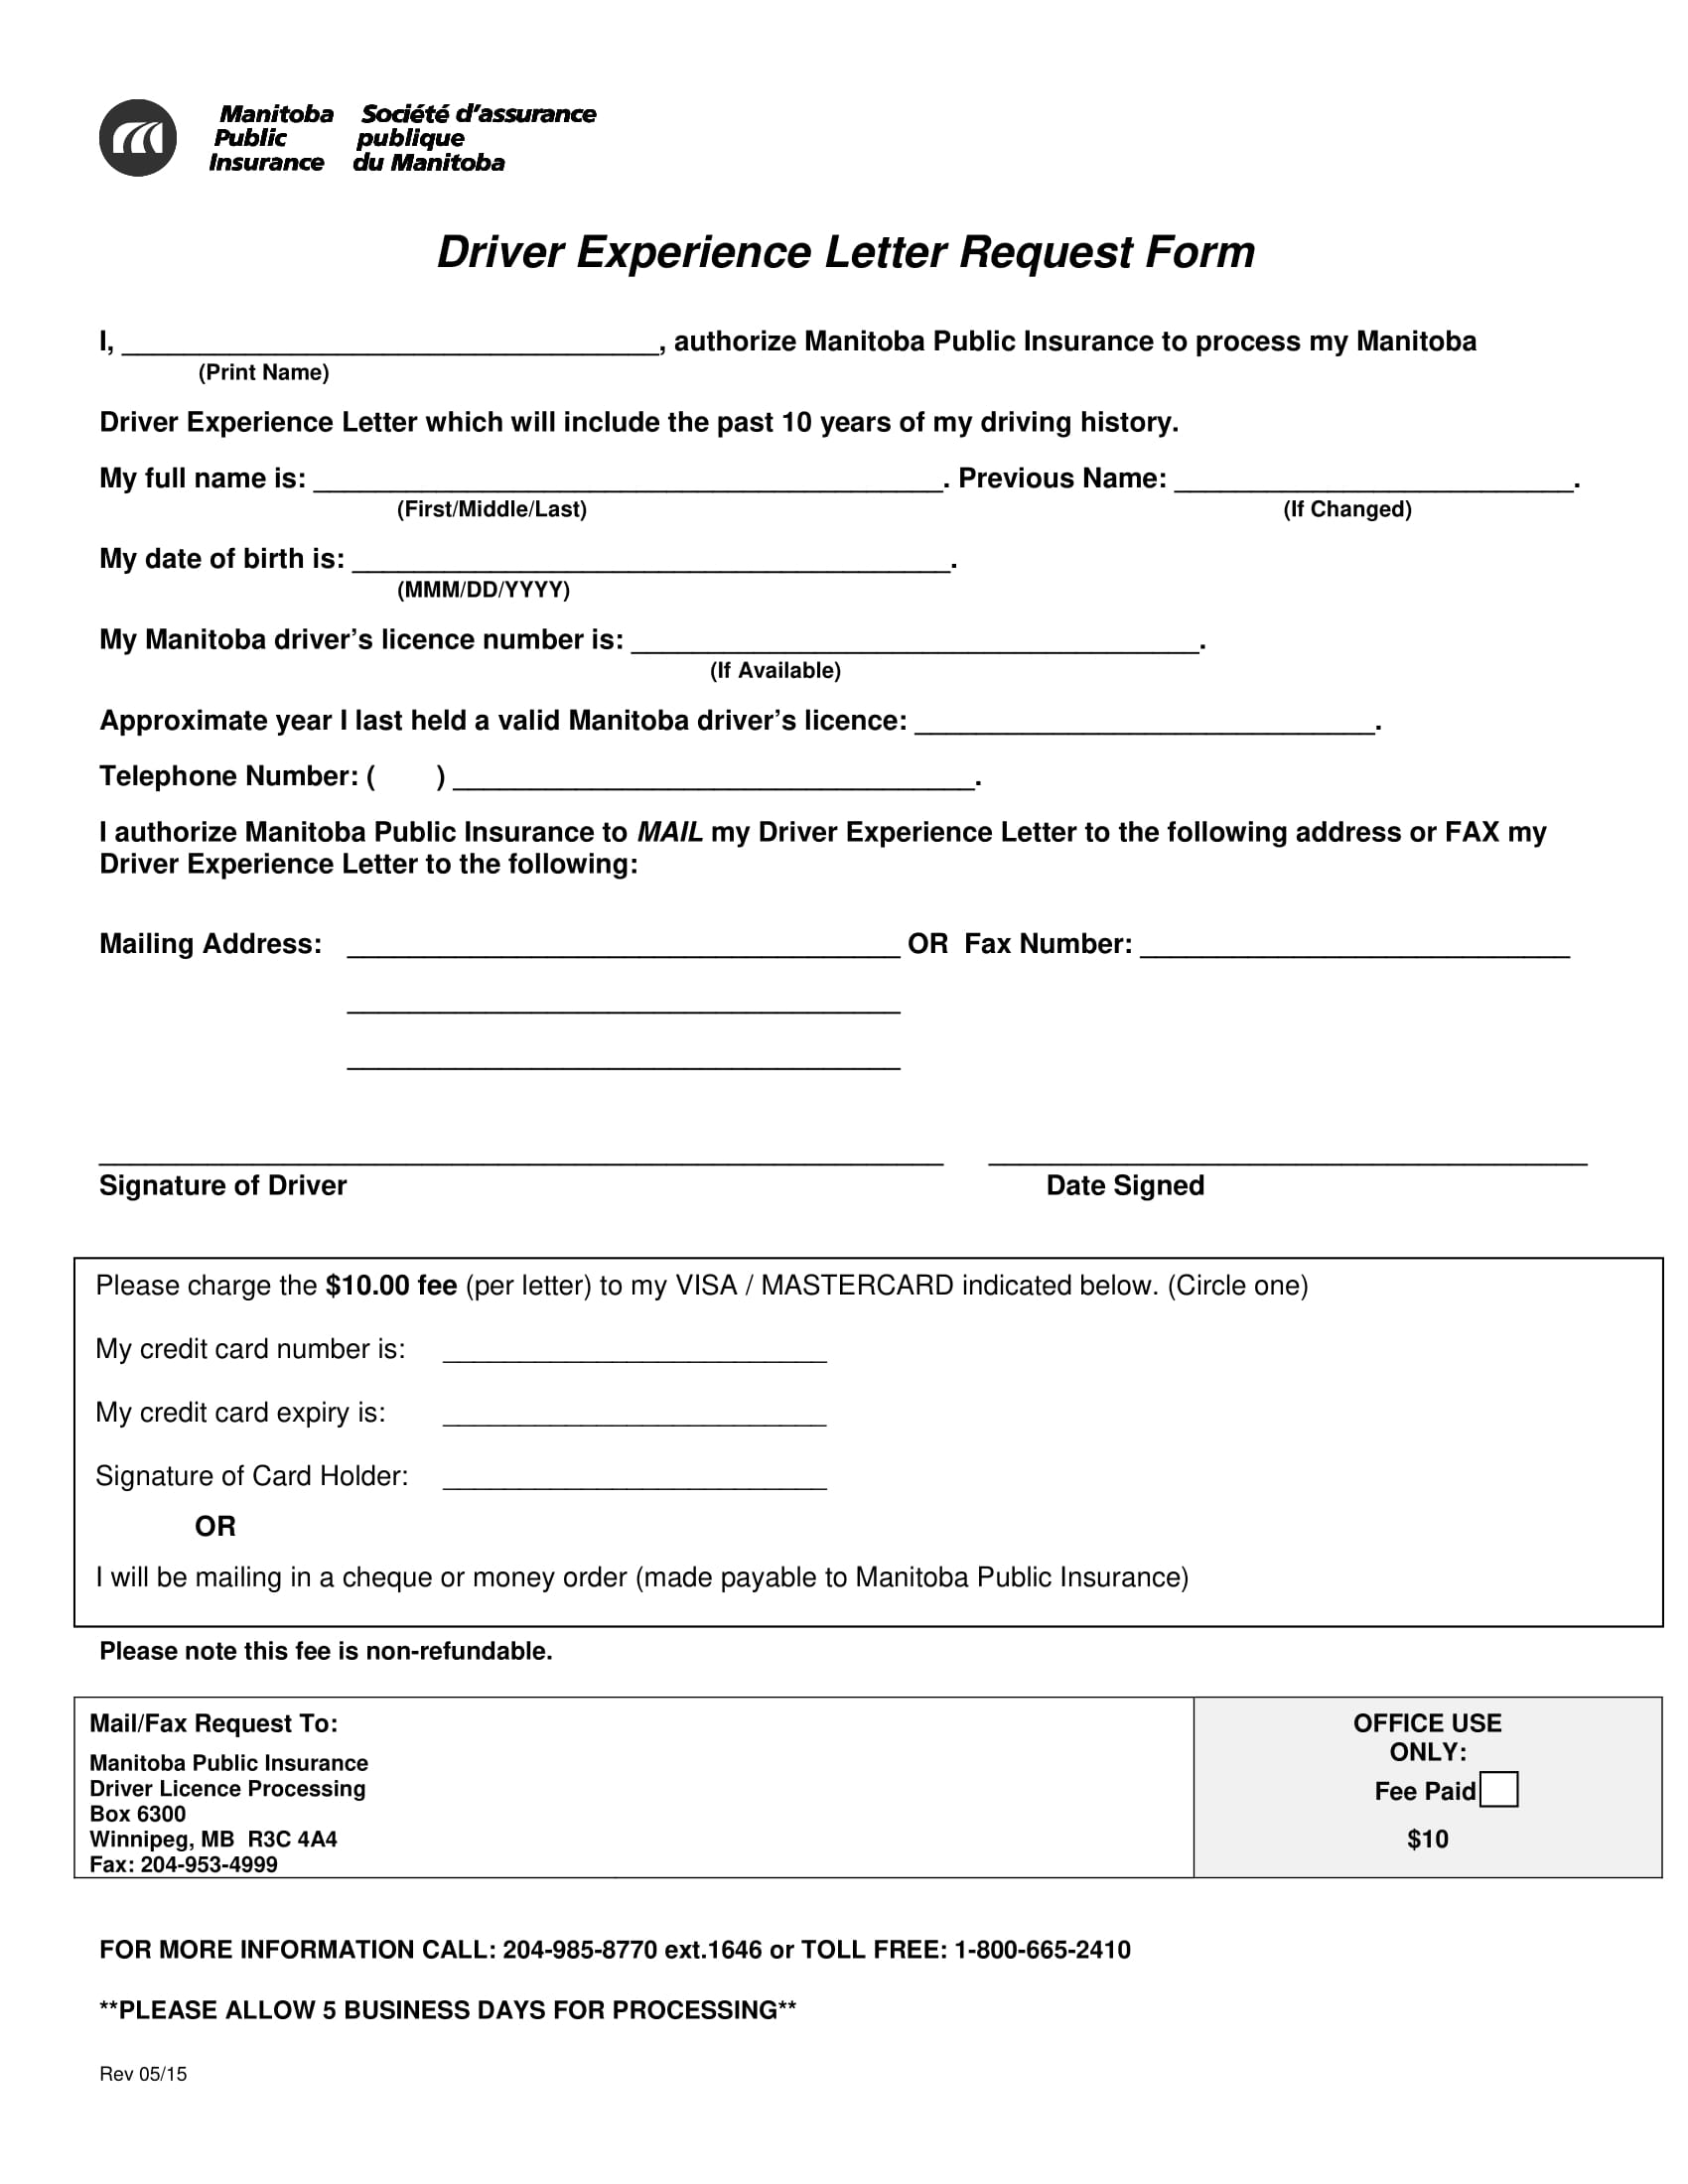 driver experience letter request form 1